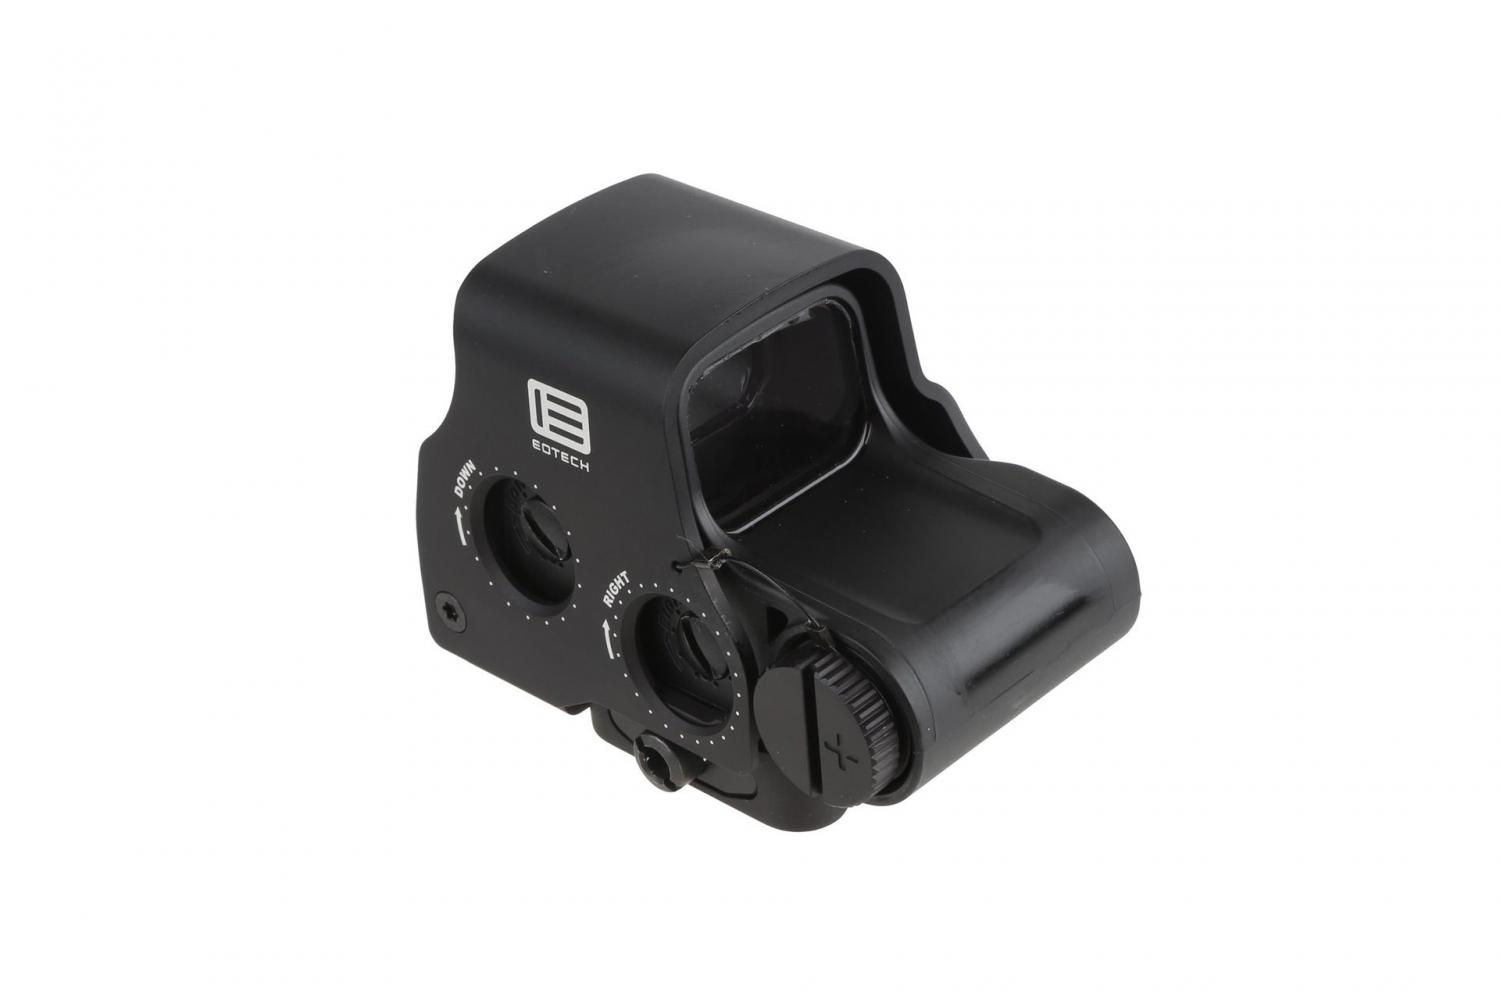 EOTech EXPS3-0 Red - $600 after code: Eotech25. 